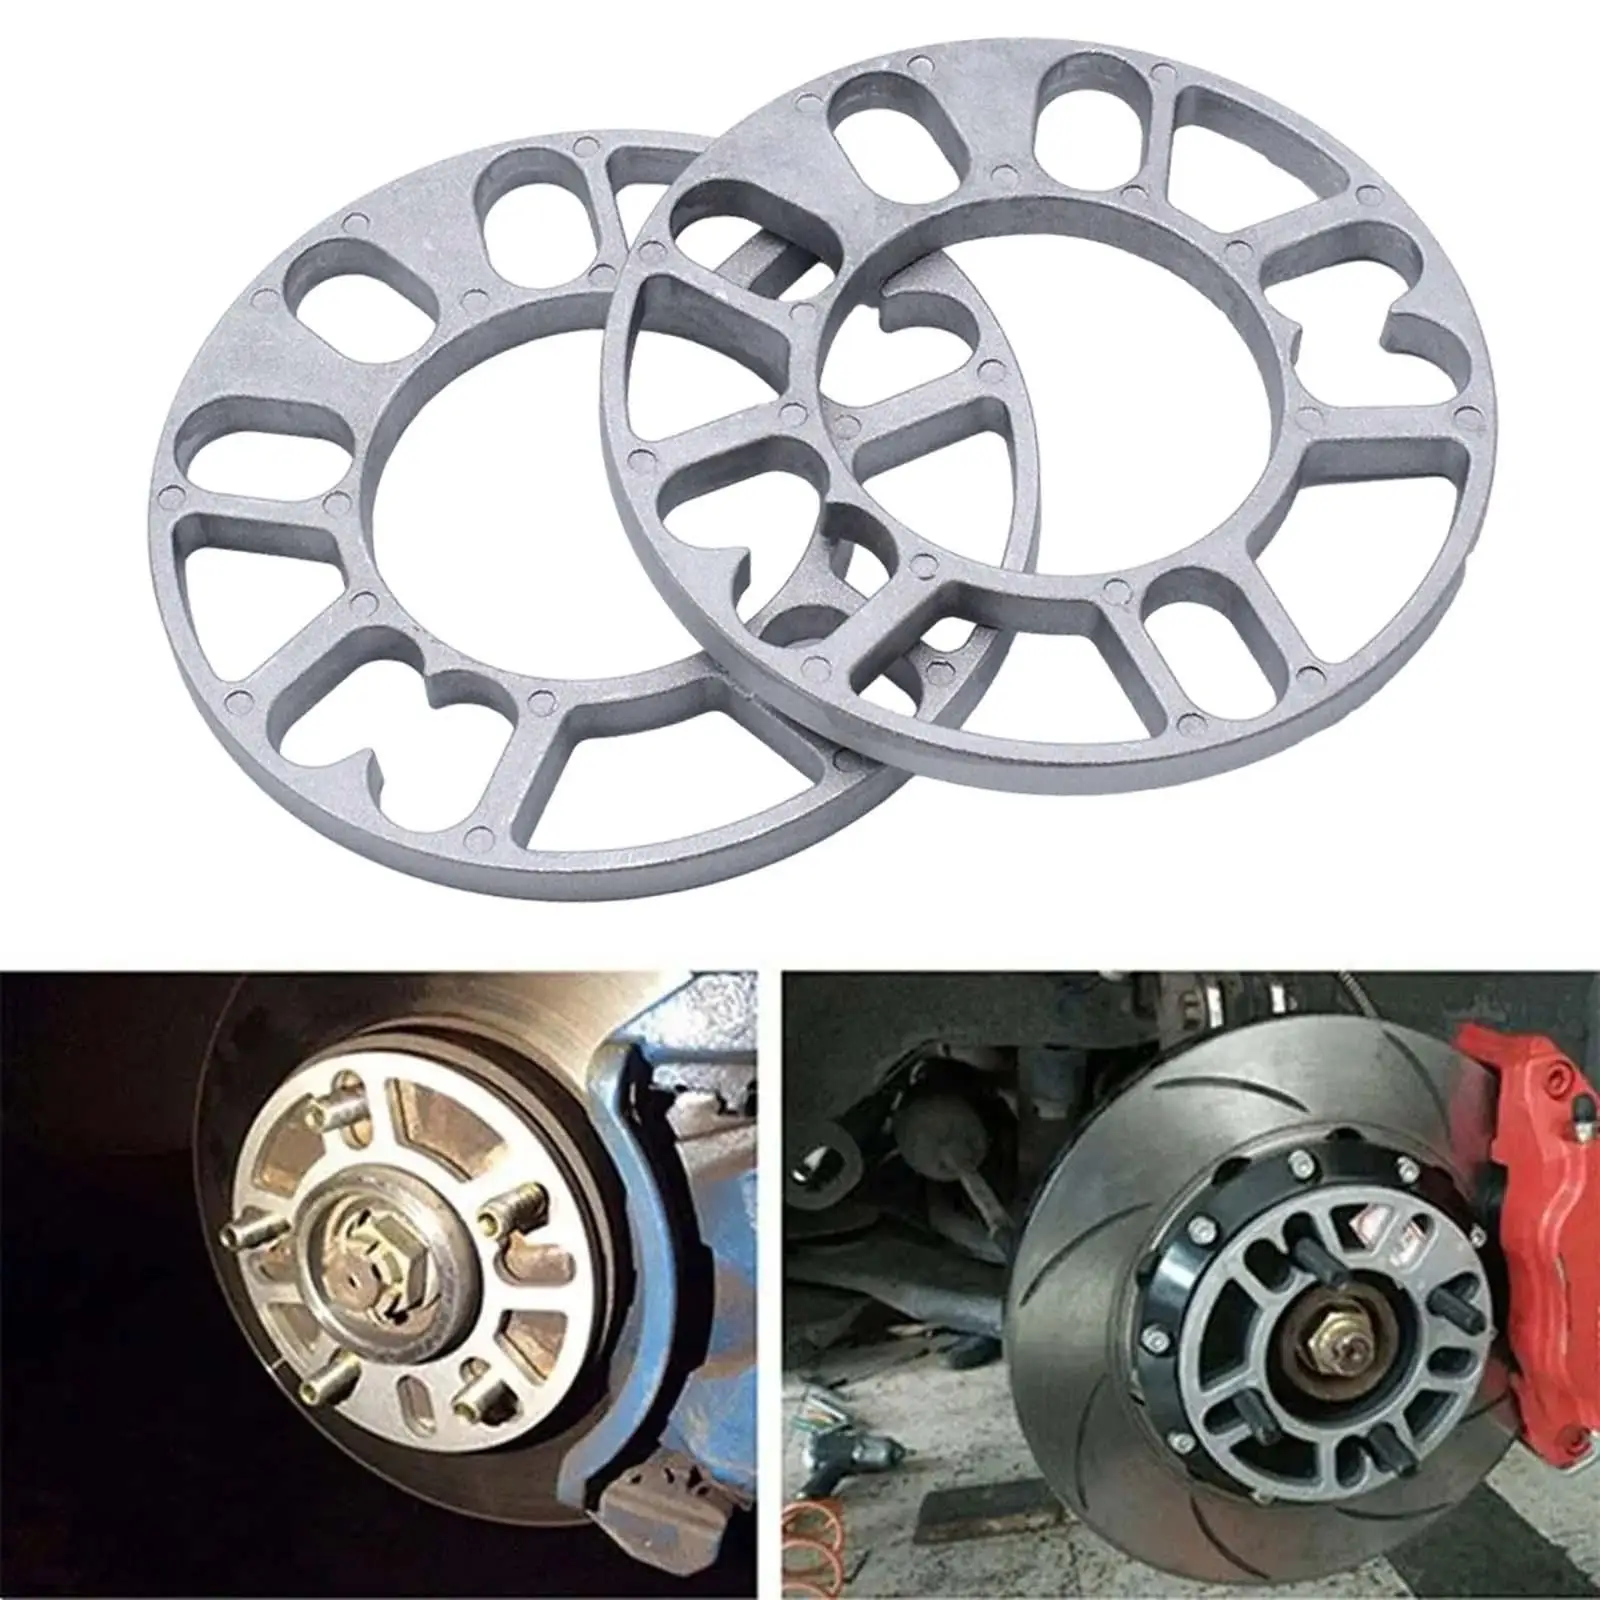 2 Pieces Hub Centric Wheel Spacers Aluminum Alloy Accessories Universal for 10mm Stud Wheels Wear Resistant Easily Install